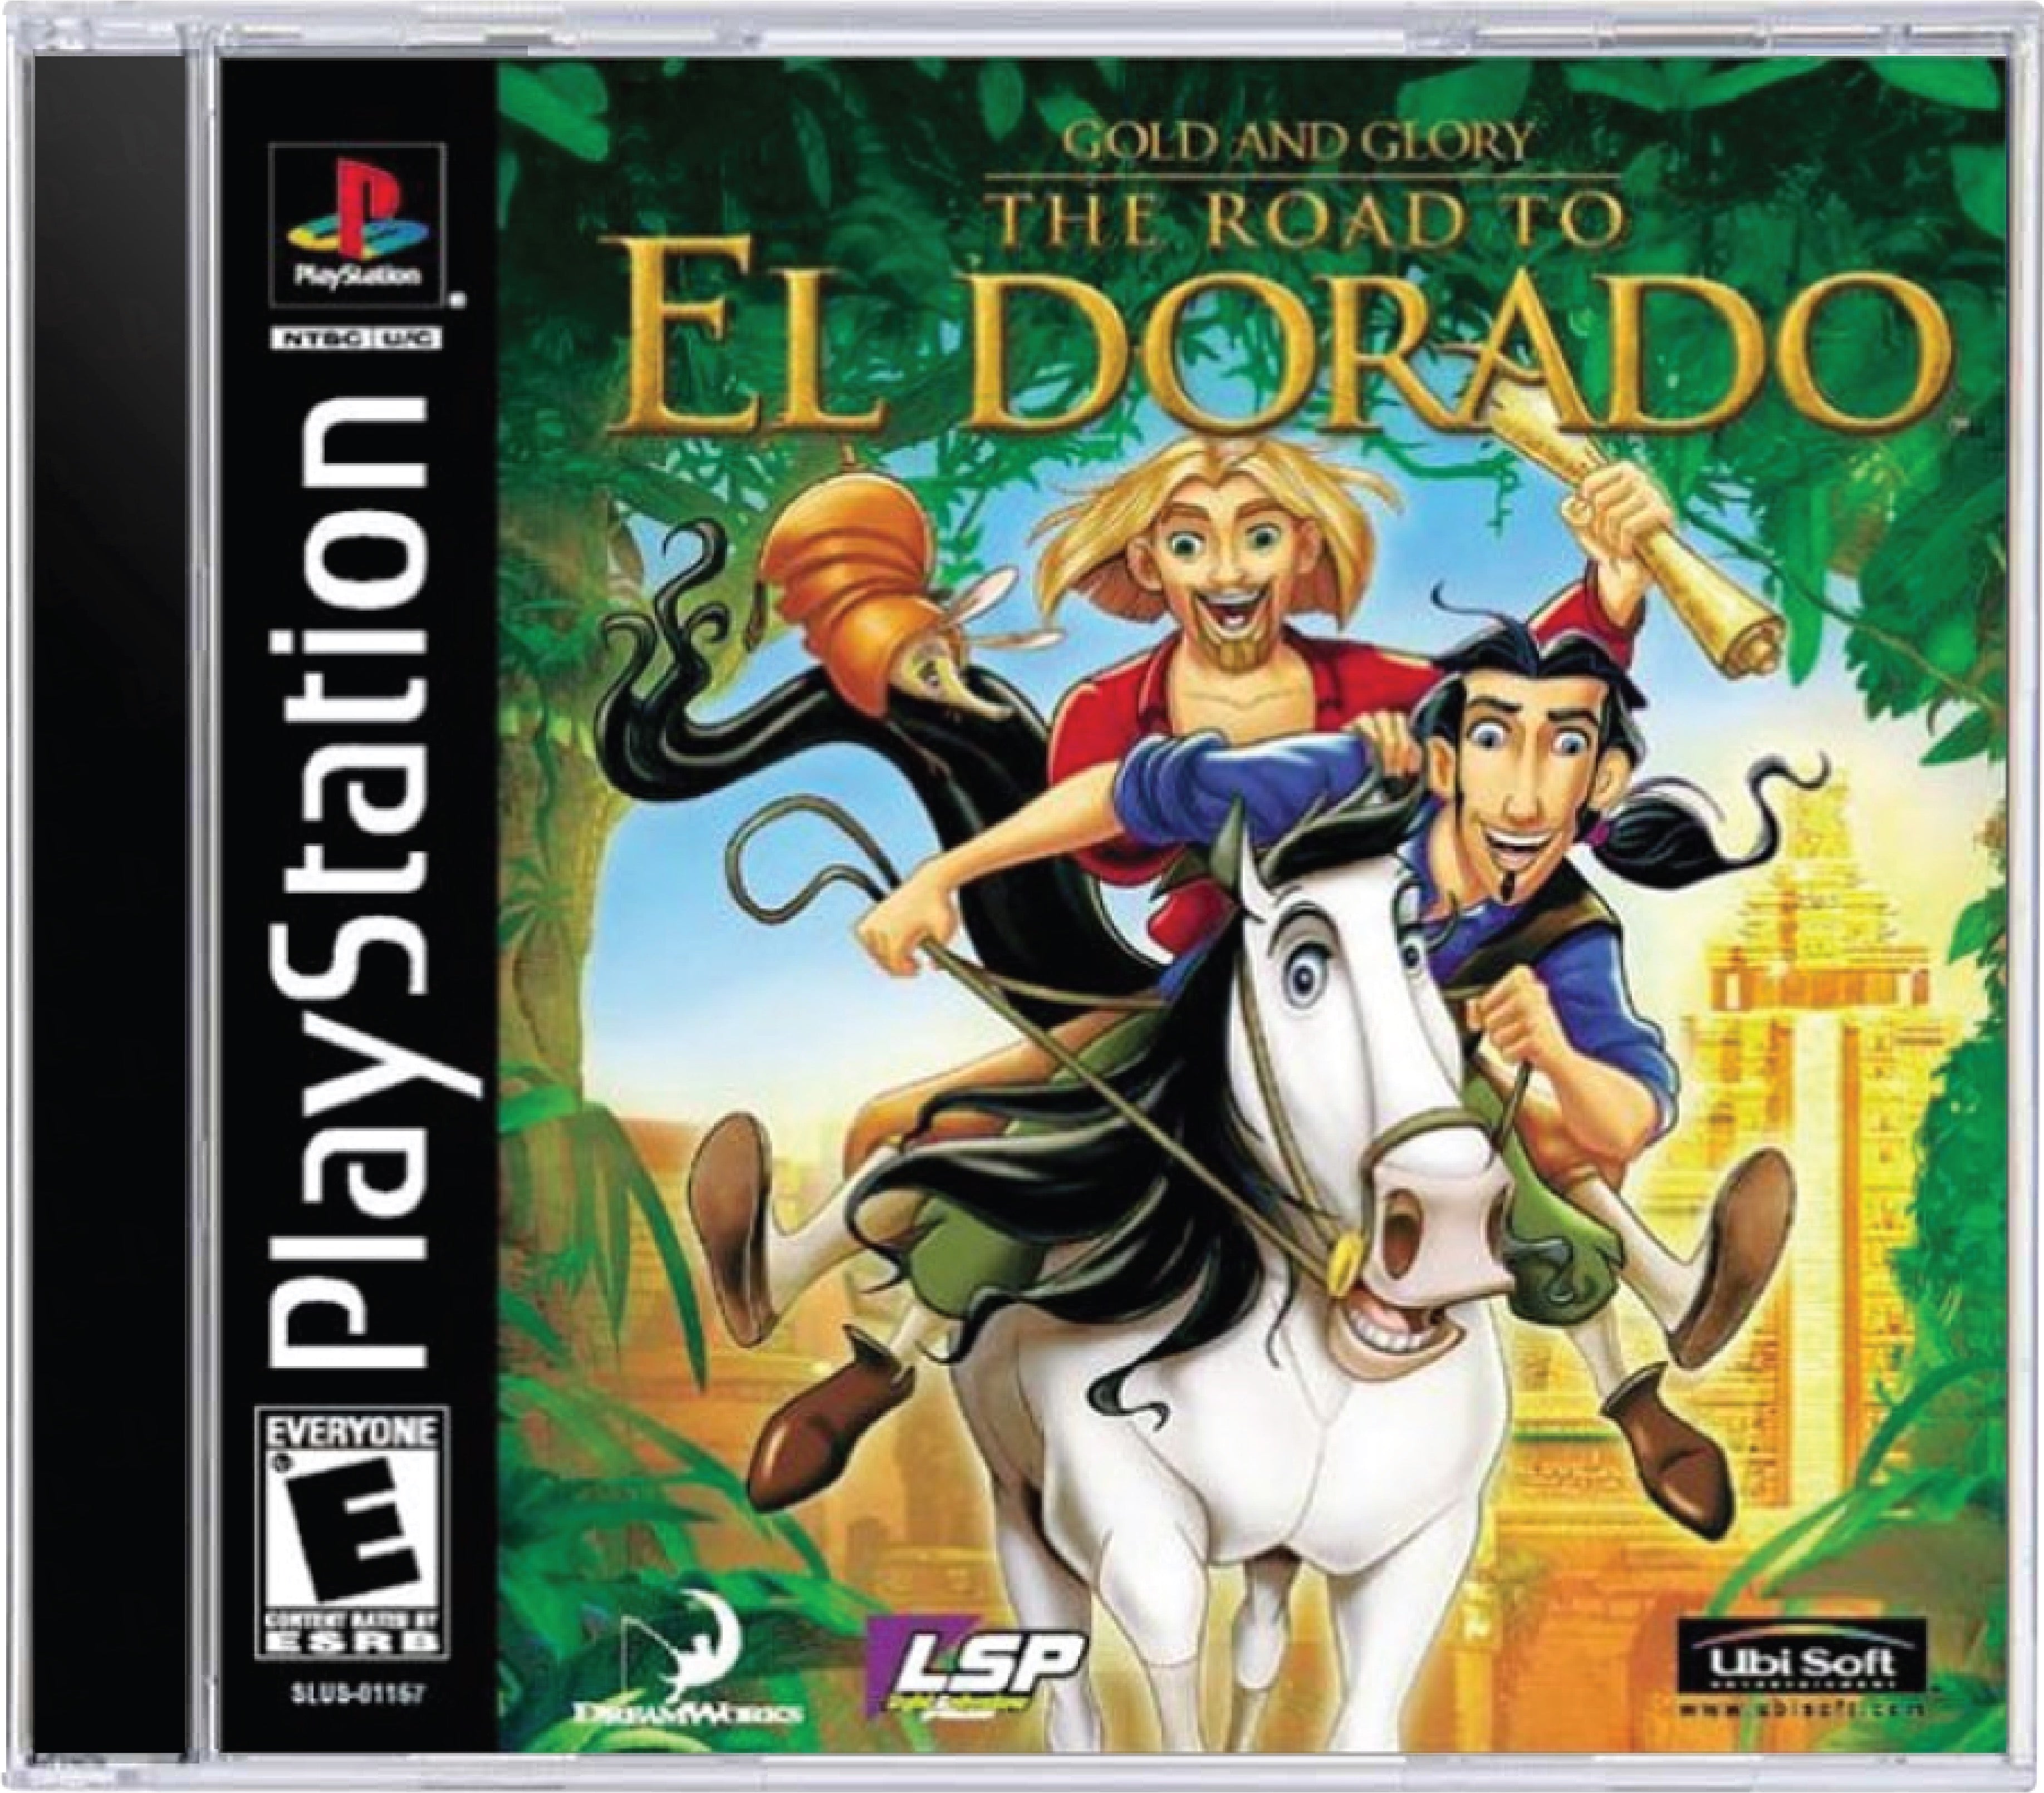 Gold and Glory The Road to El Dorado Cover Art and Product Photo